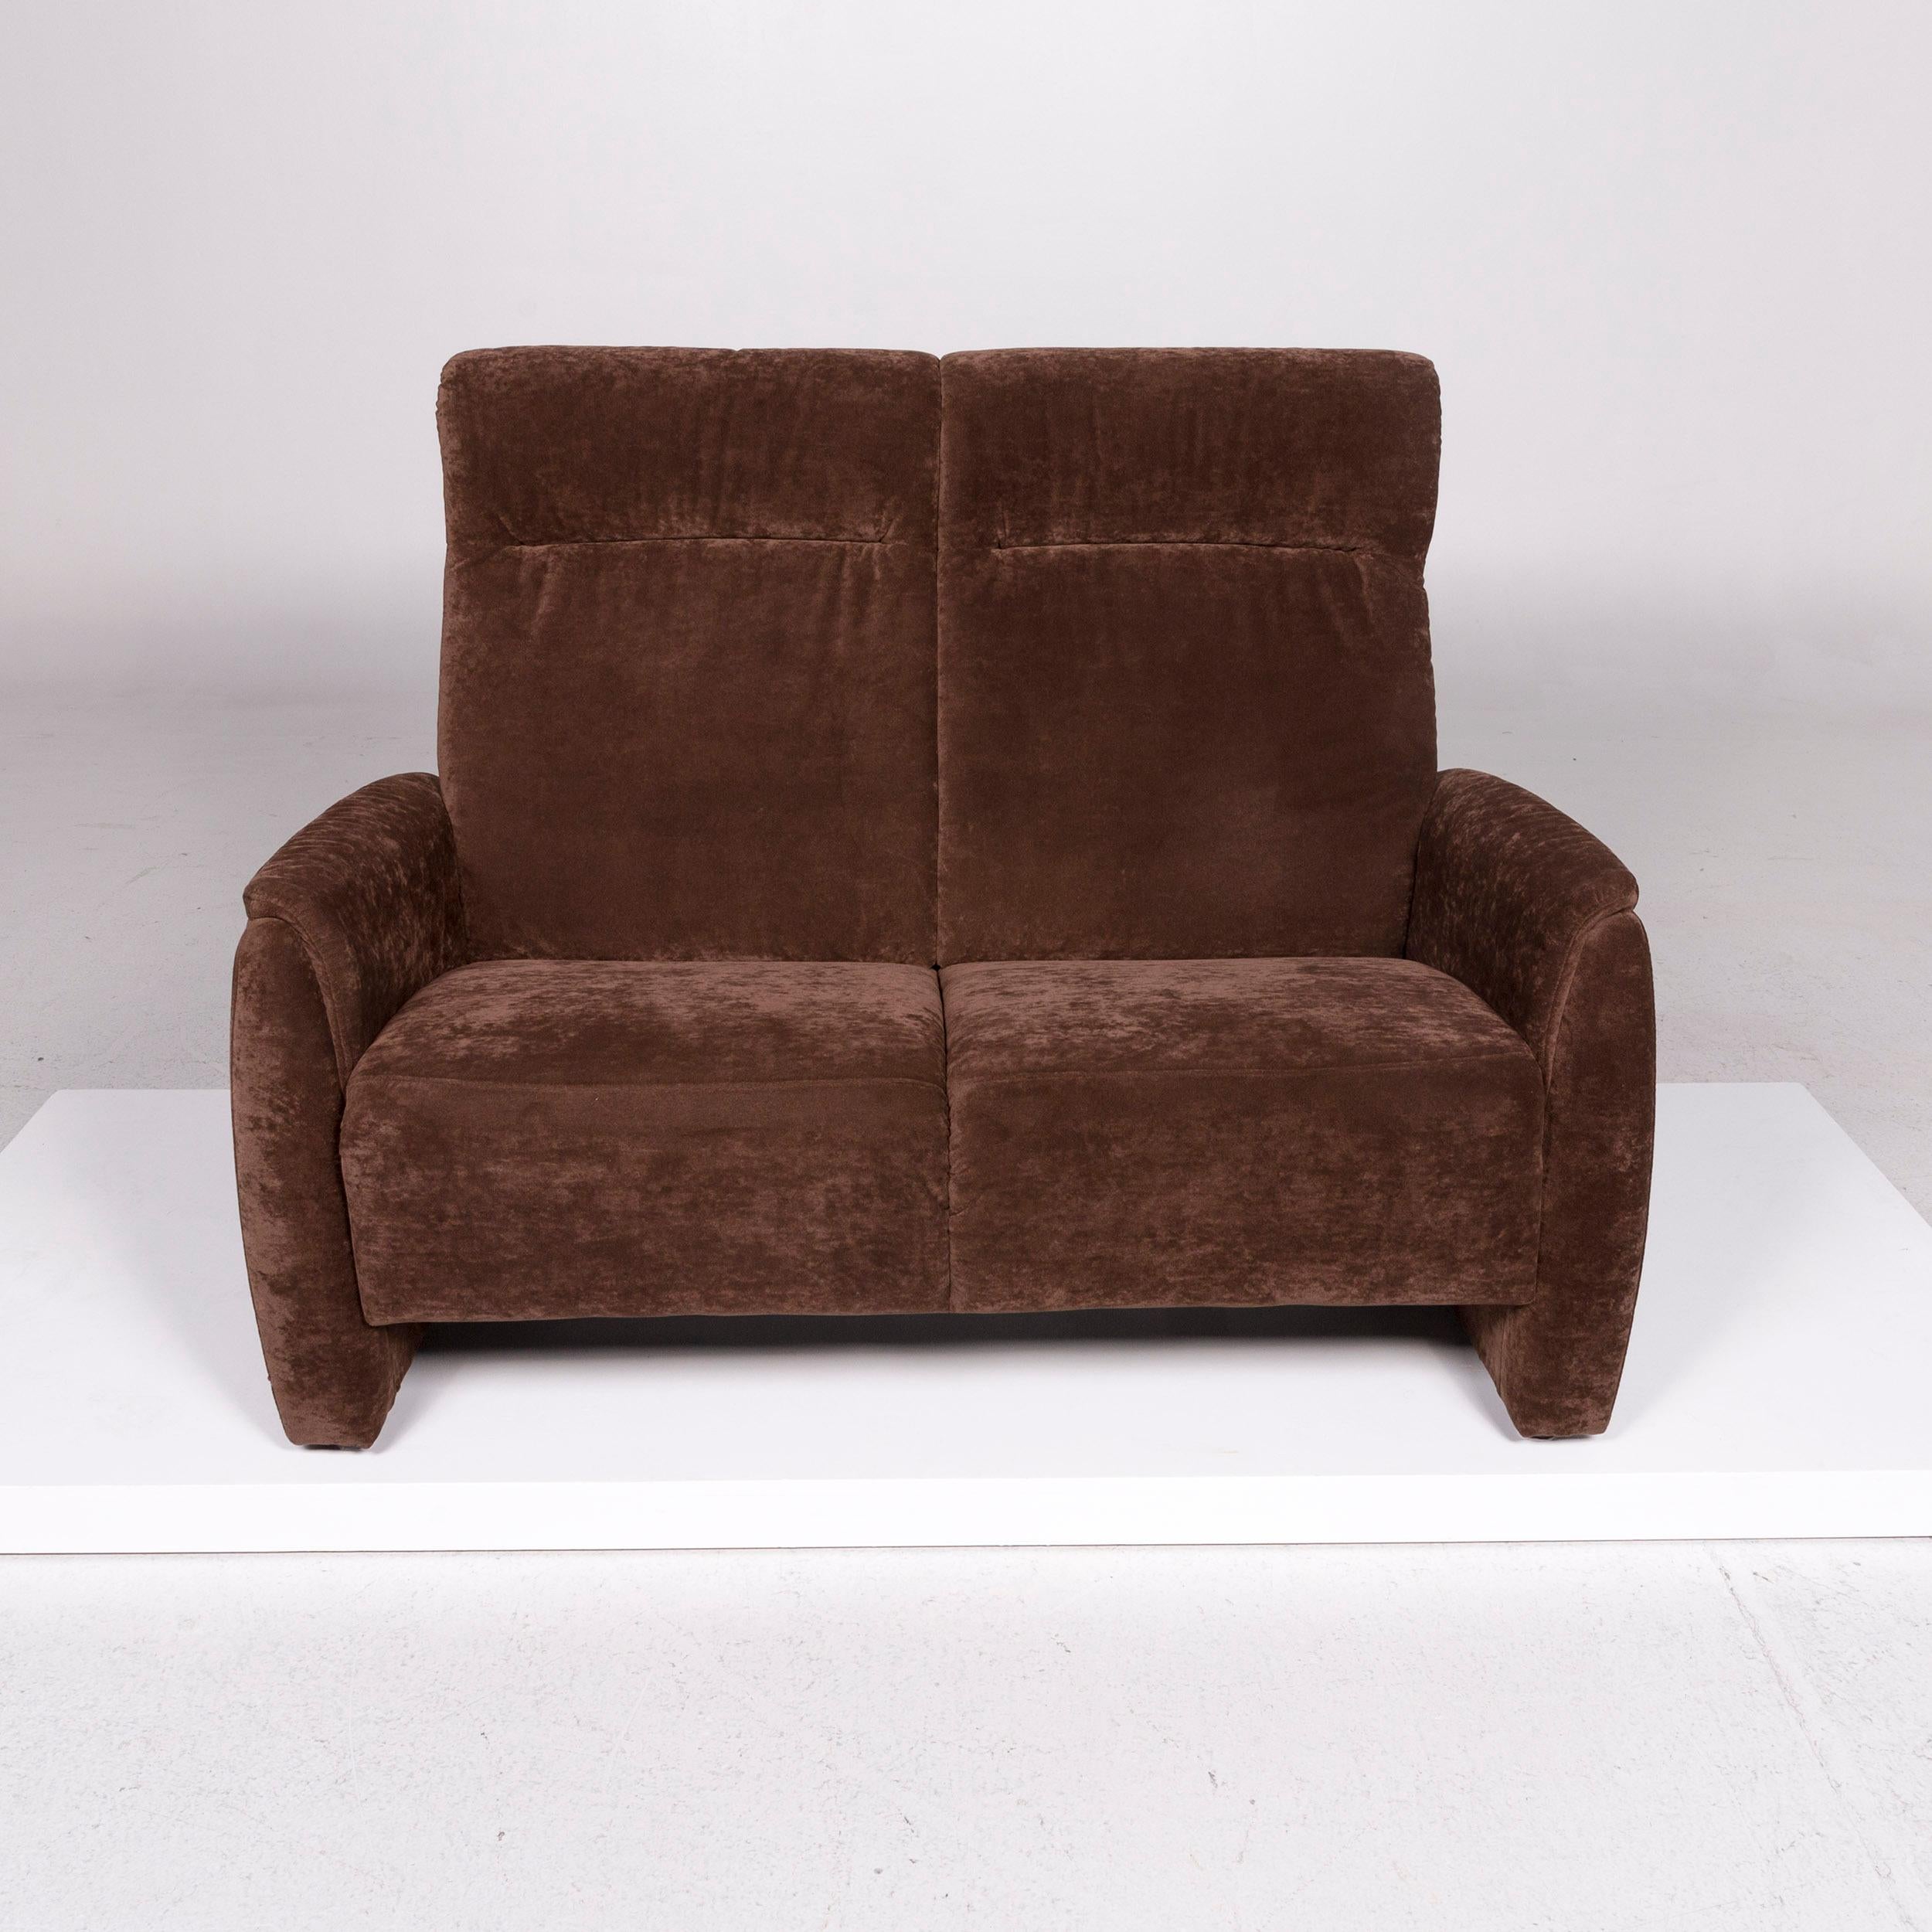 Contemporary Himolla Fabric Sofa Brown Two-Seat Couch For Sale